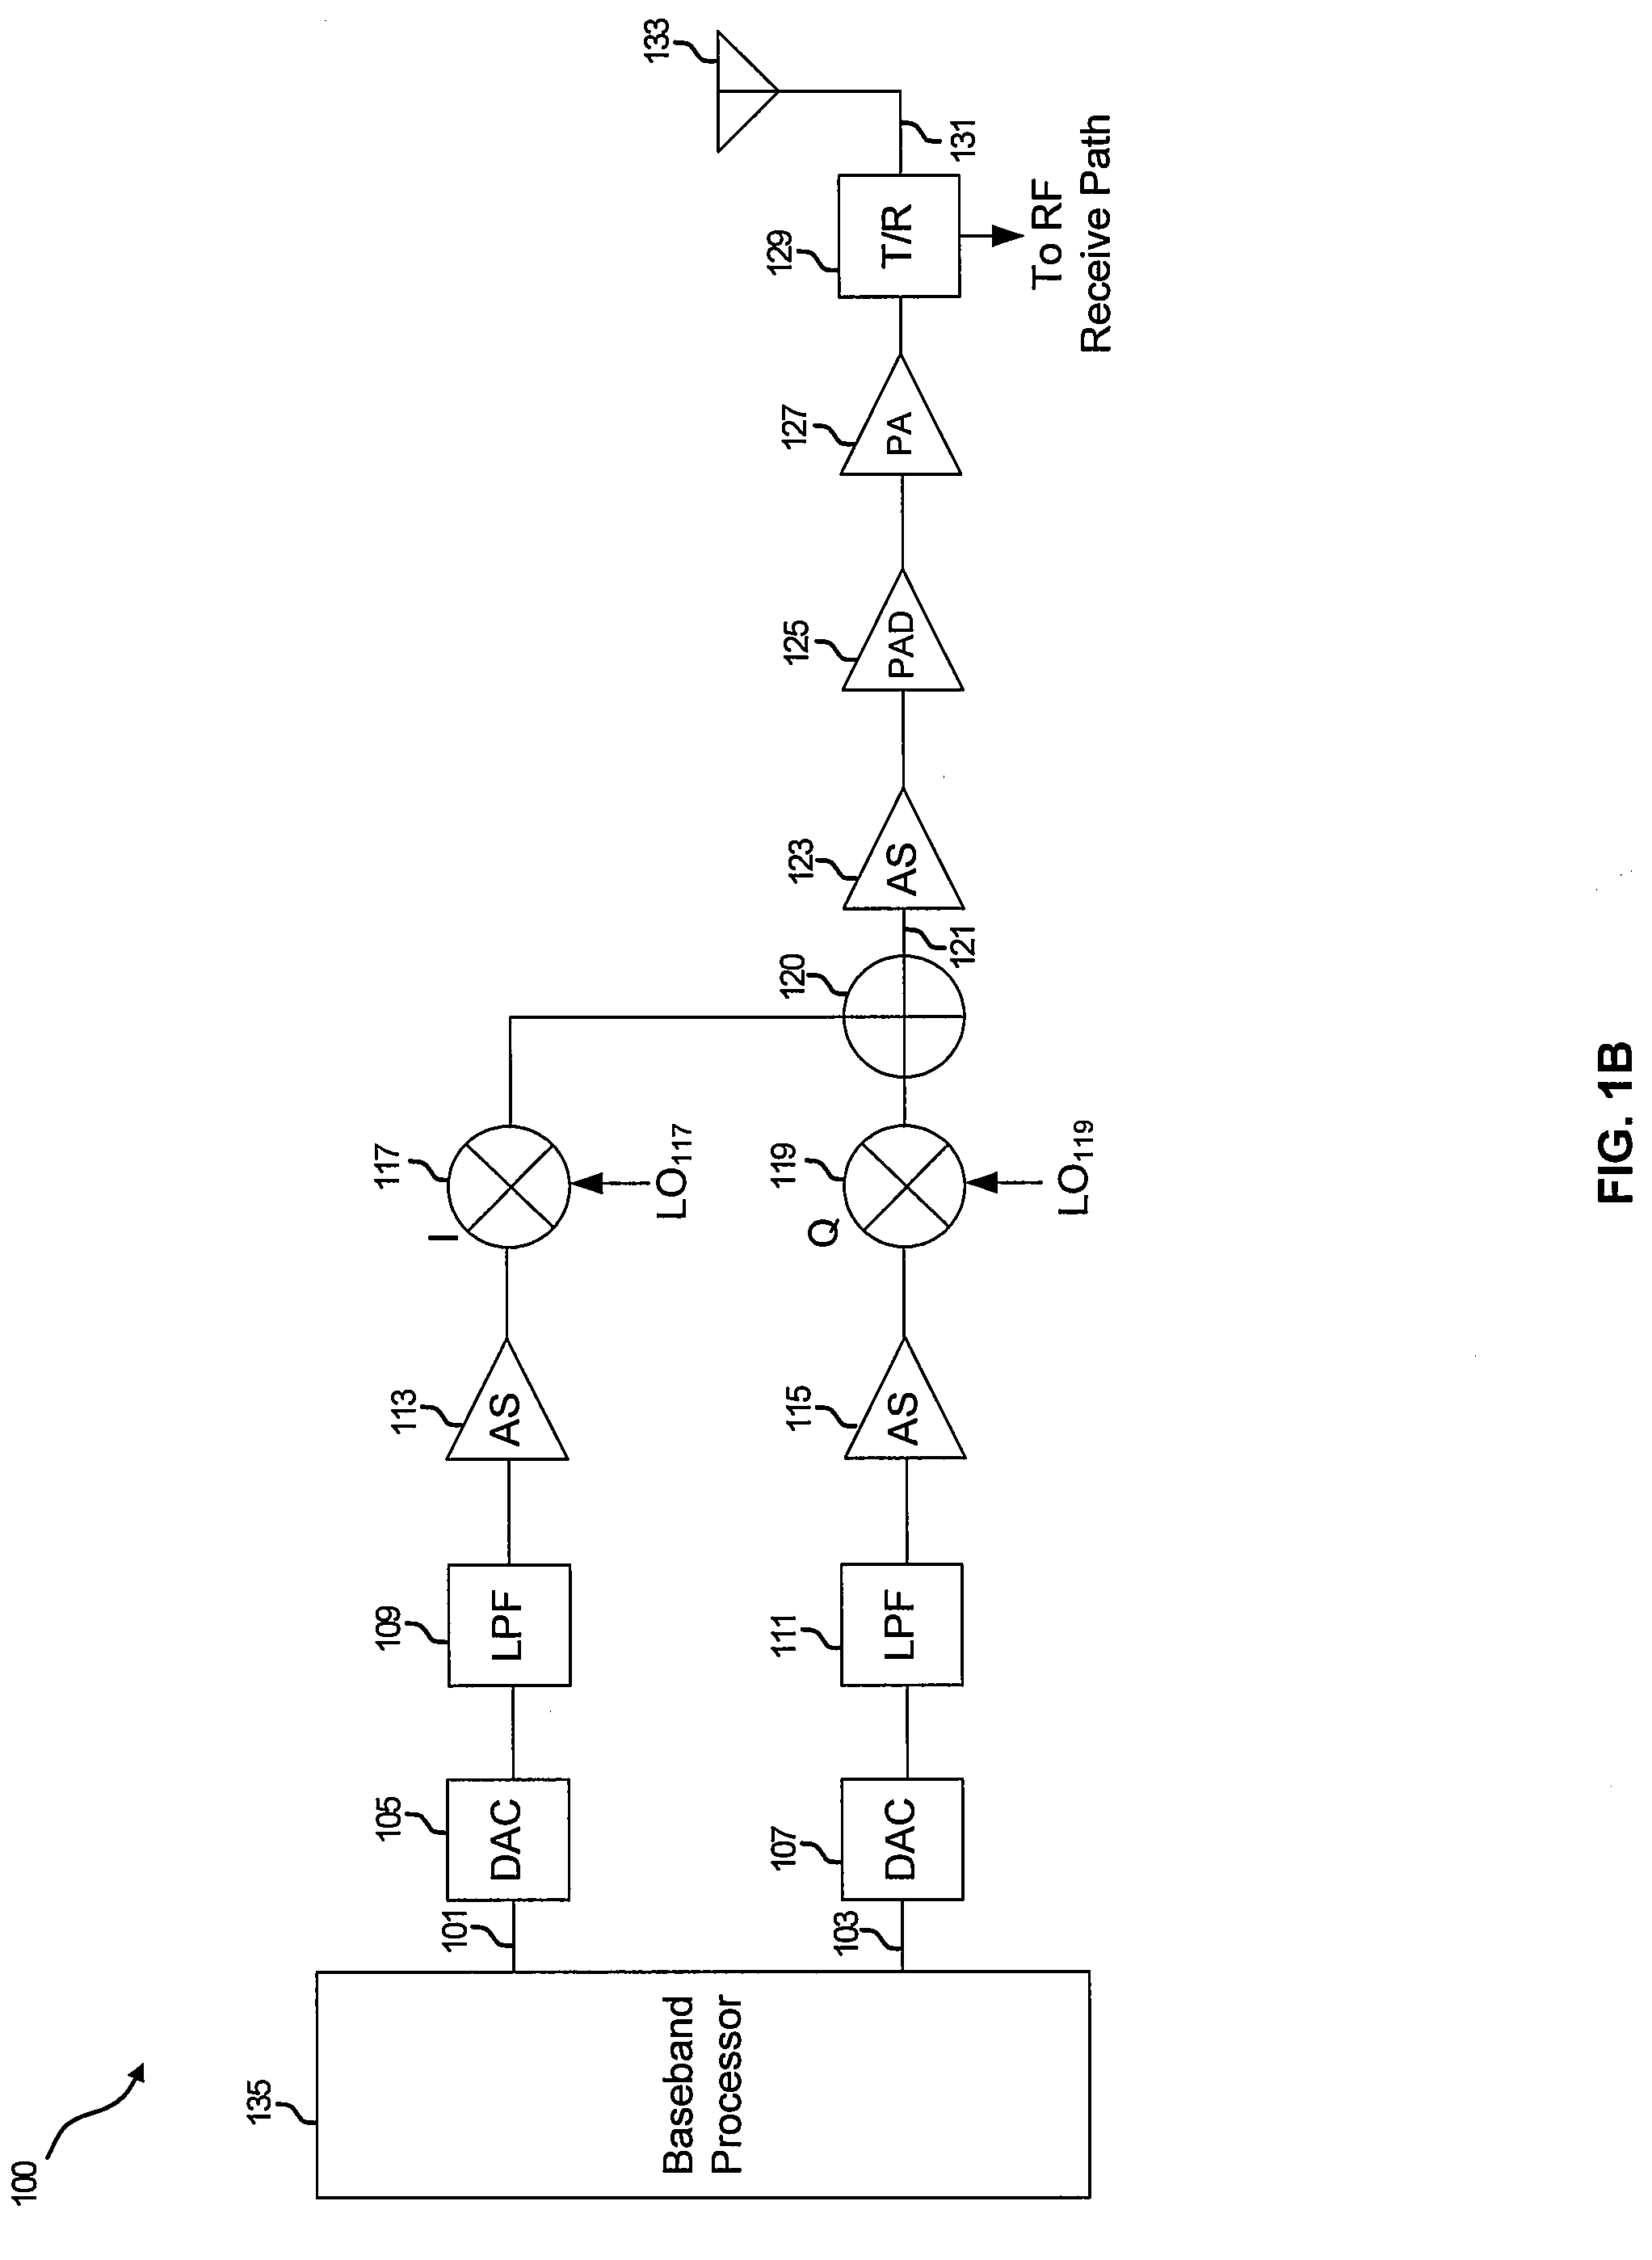 Method and system for level detector calibration for accurate transmit power control